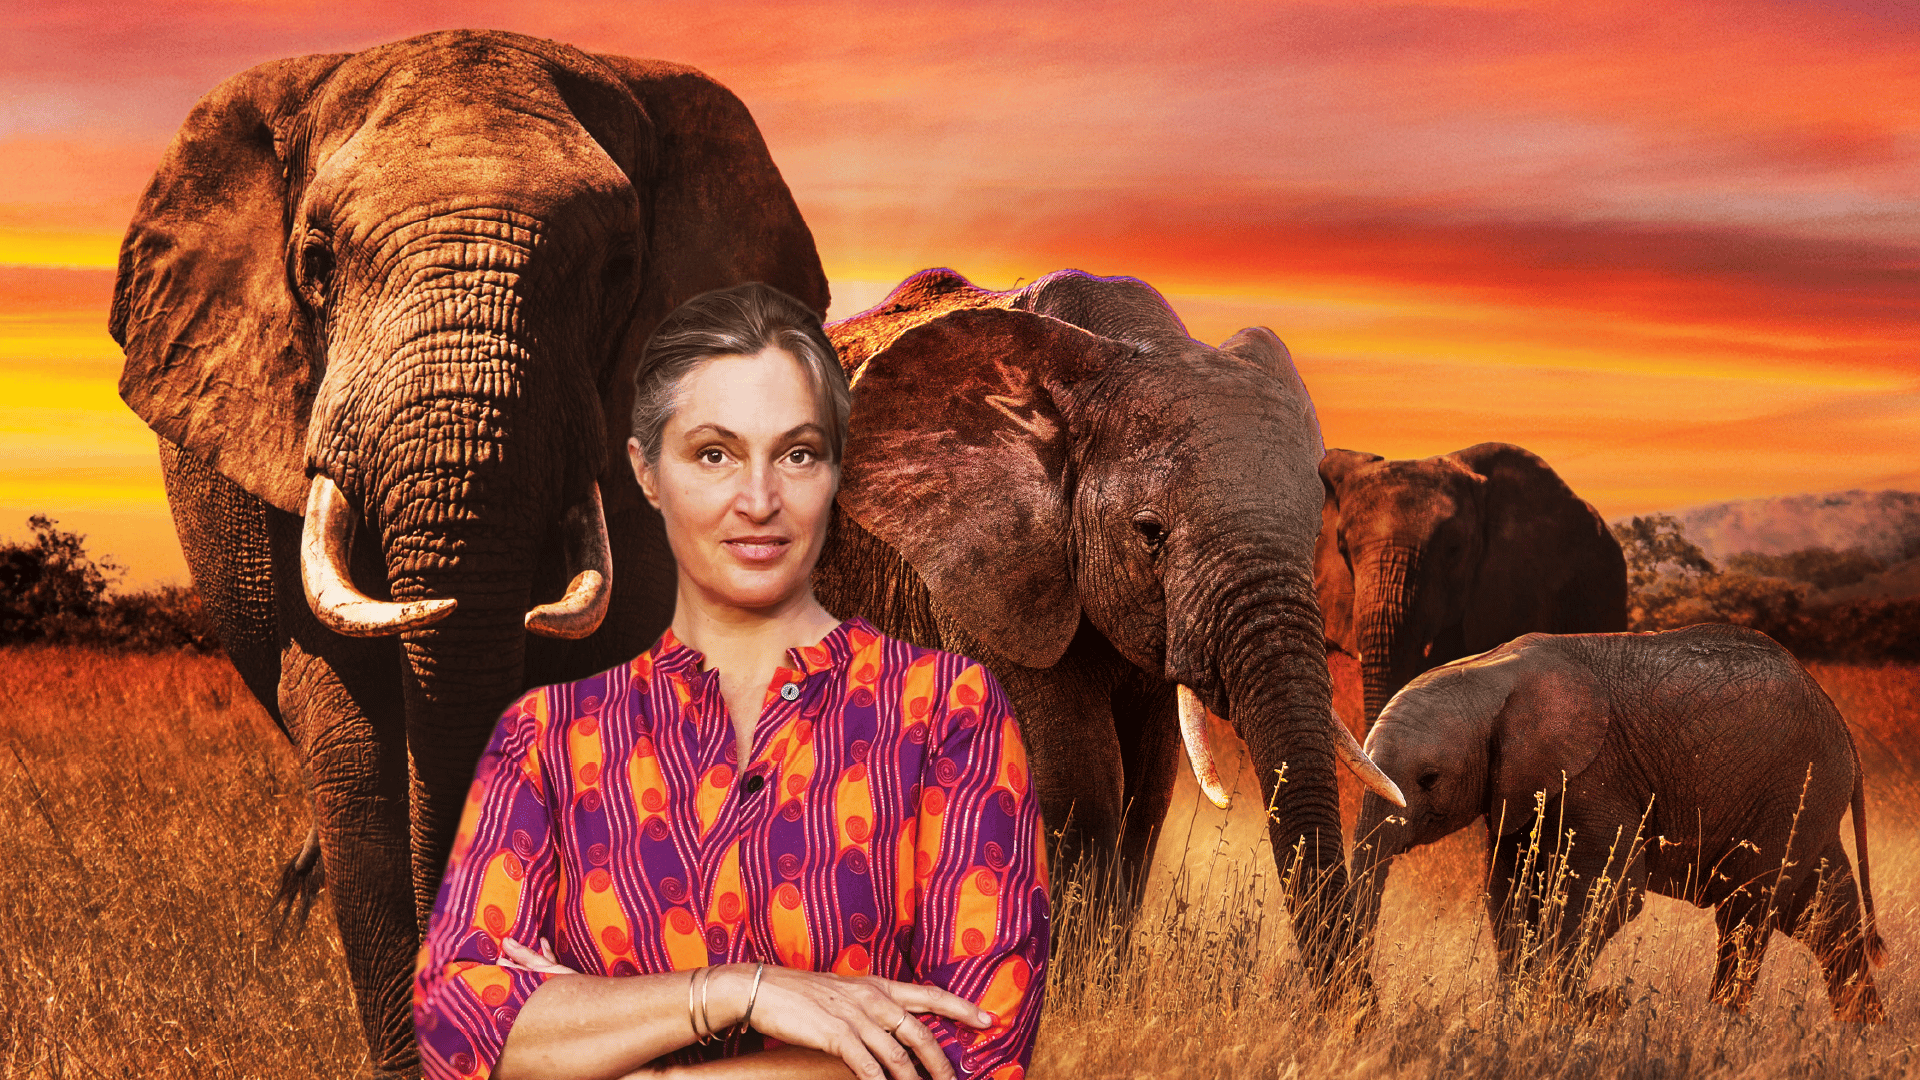 Wildlife filmmaker Saba Douglas-Hamilton is wearing a brightly coloured shirt, standing in front of a sunset scene of elephants on the African Savannah